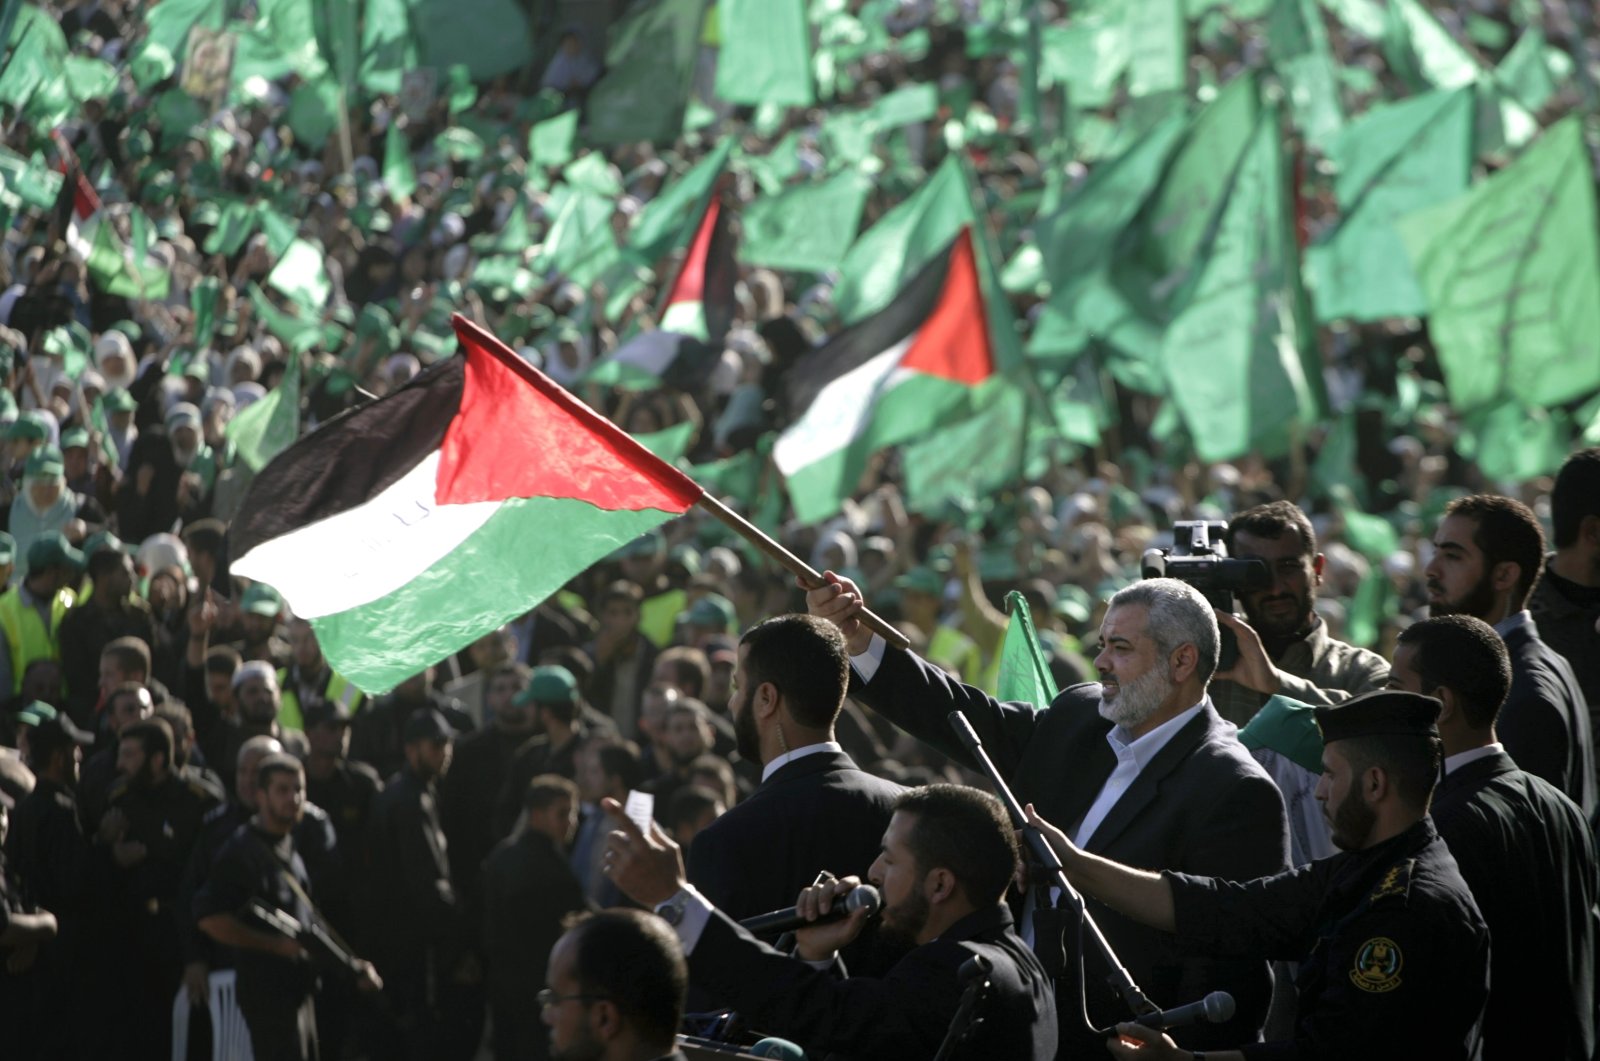 Chief of Hamas political bureau Ismail Haniyeh waves a Palestinian flag during a celebration of the 20th anniversary of the foundation of Hamas in this undated photo. (AP Photo)